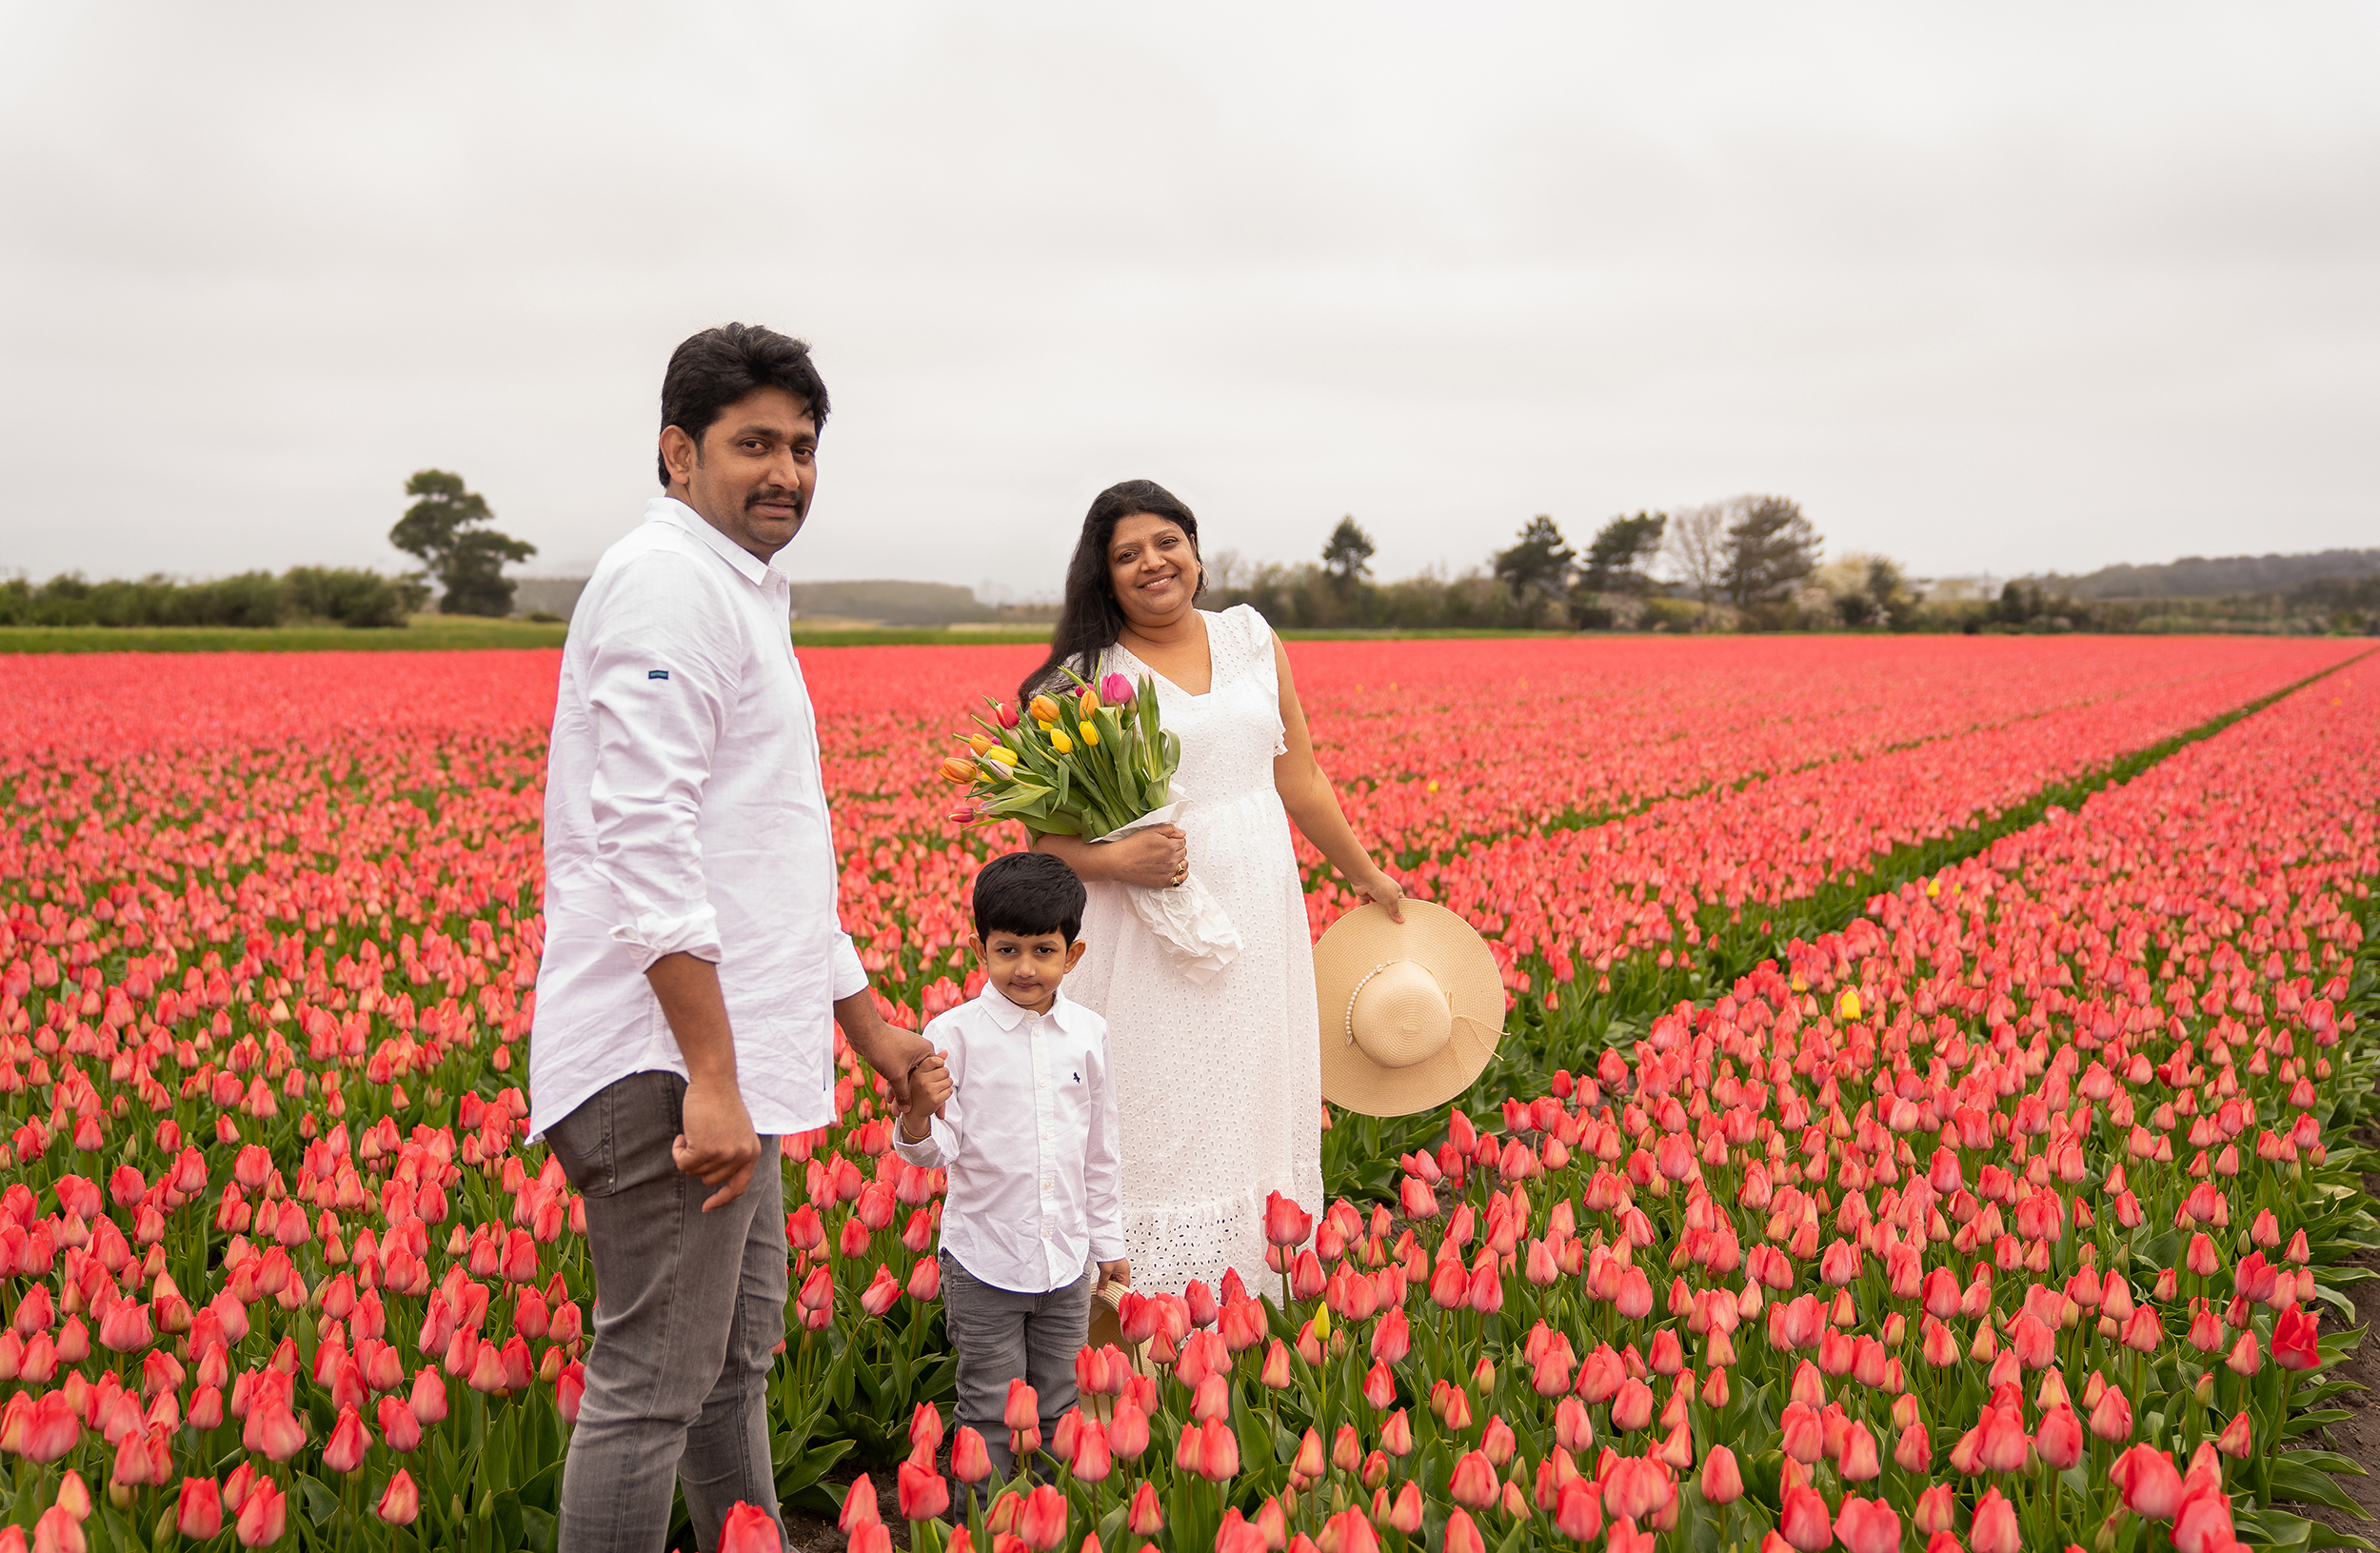 An Indian family of 3 smiling to the camera and wearing white clothing in the middle of red tulip fields.